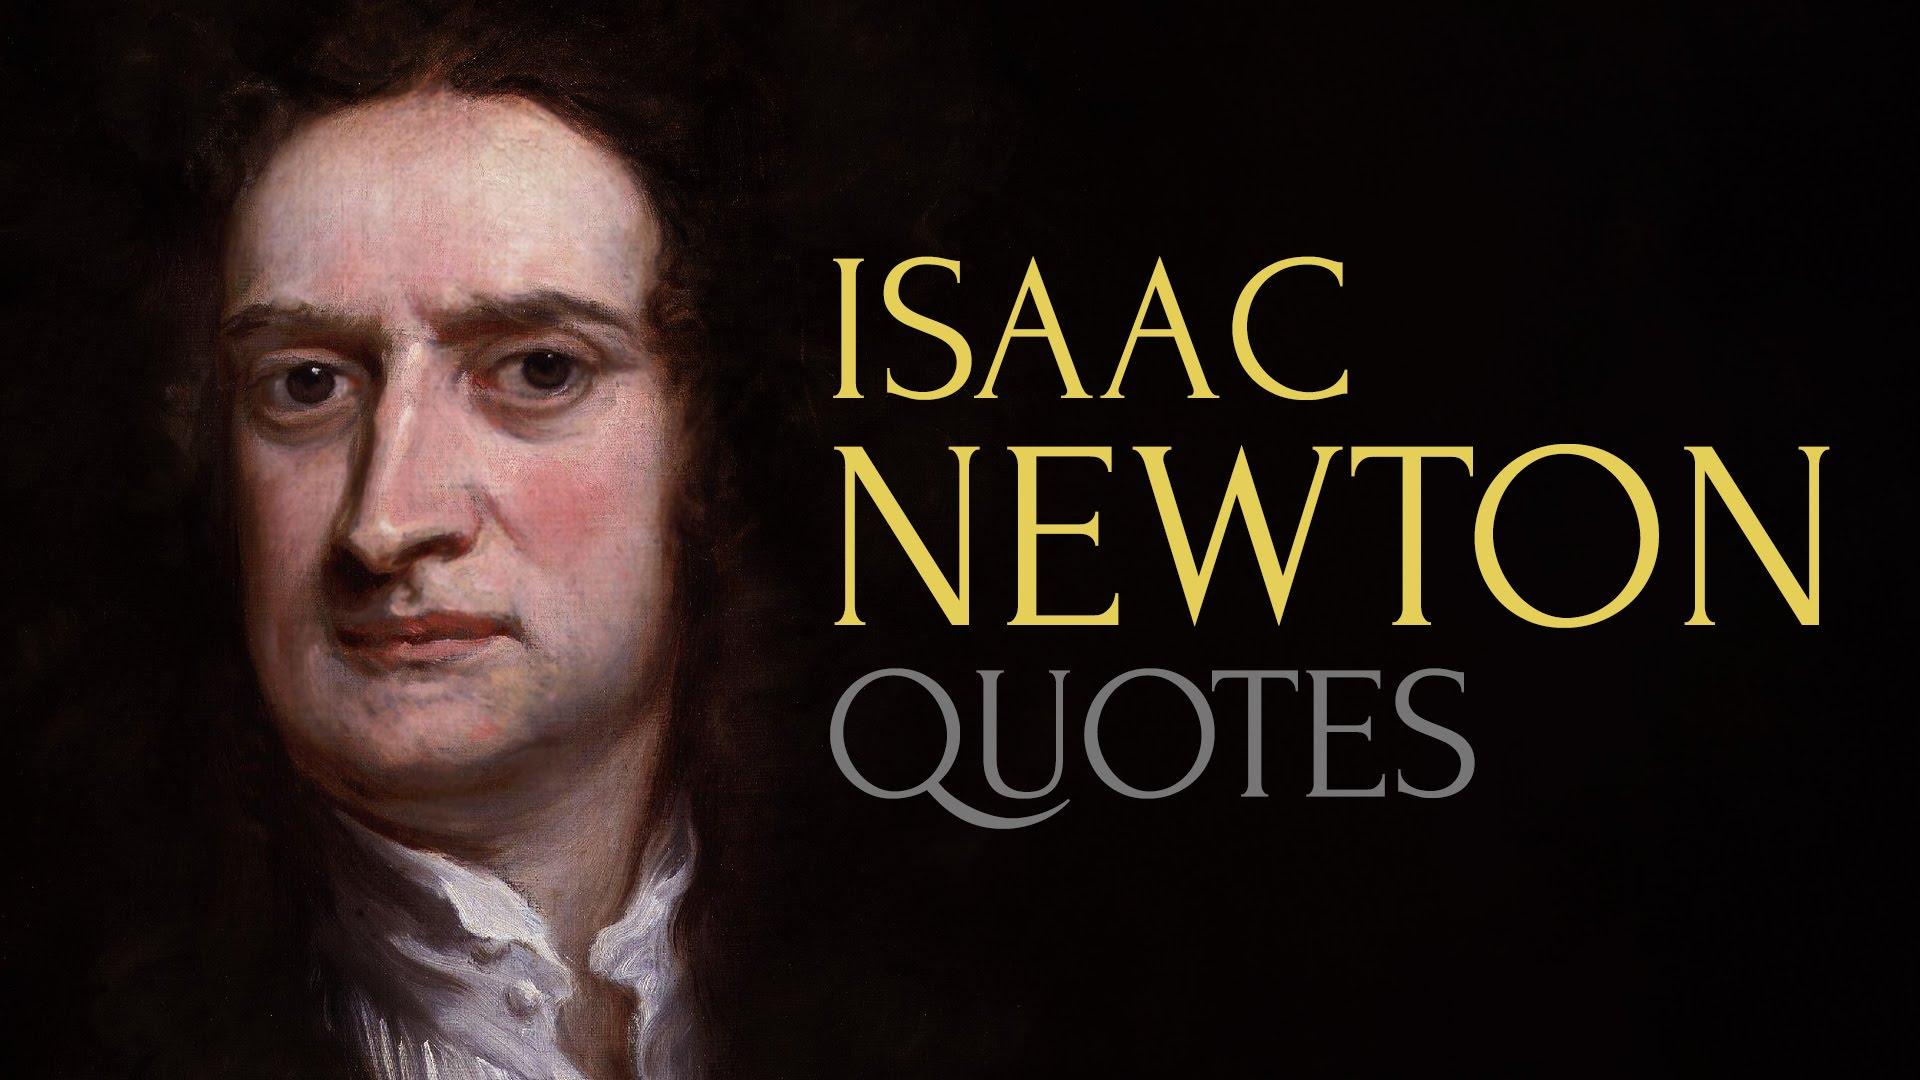 Isaac Newton Quotes About Life. QUOTES OF THE DAY